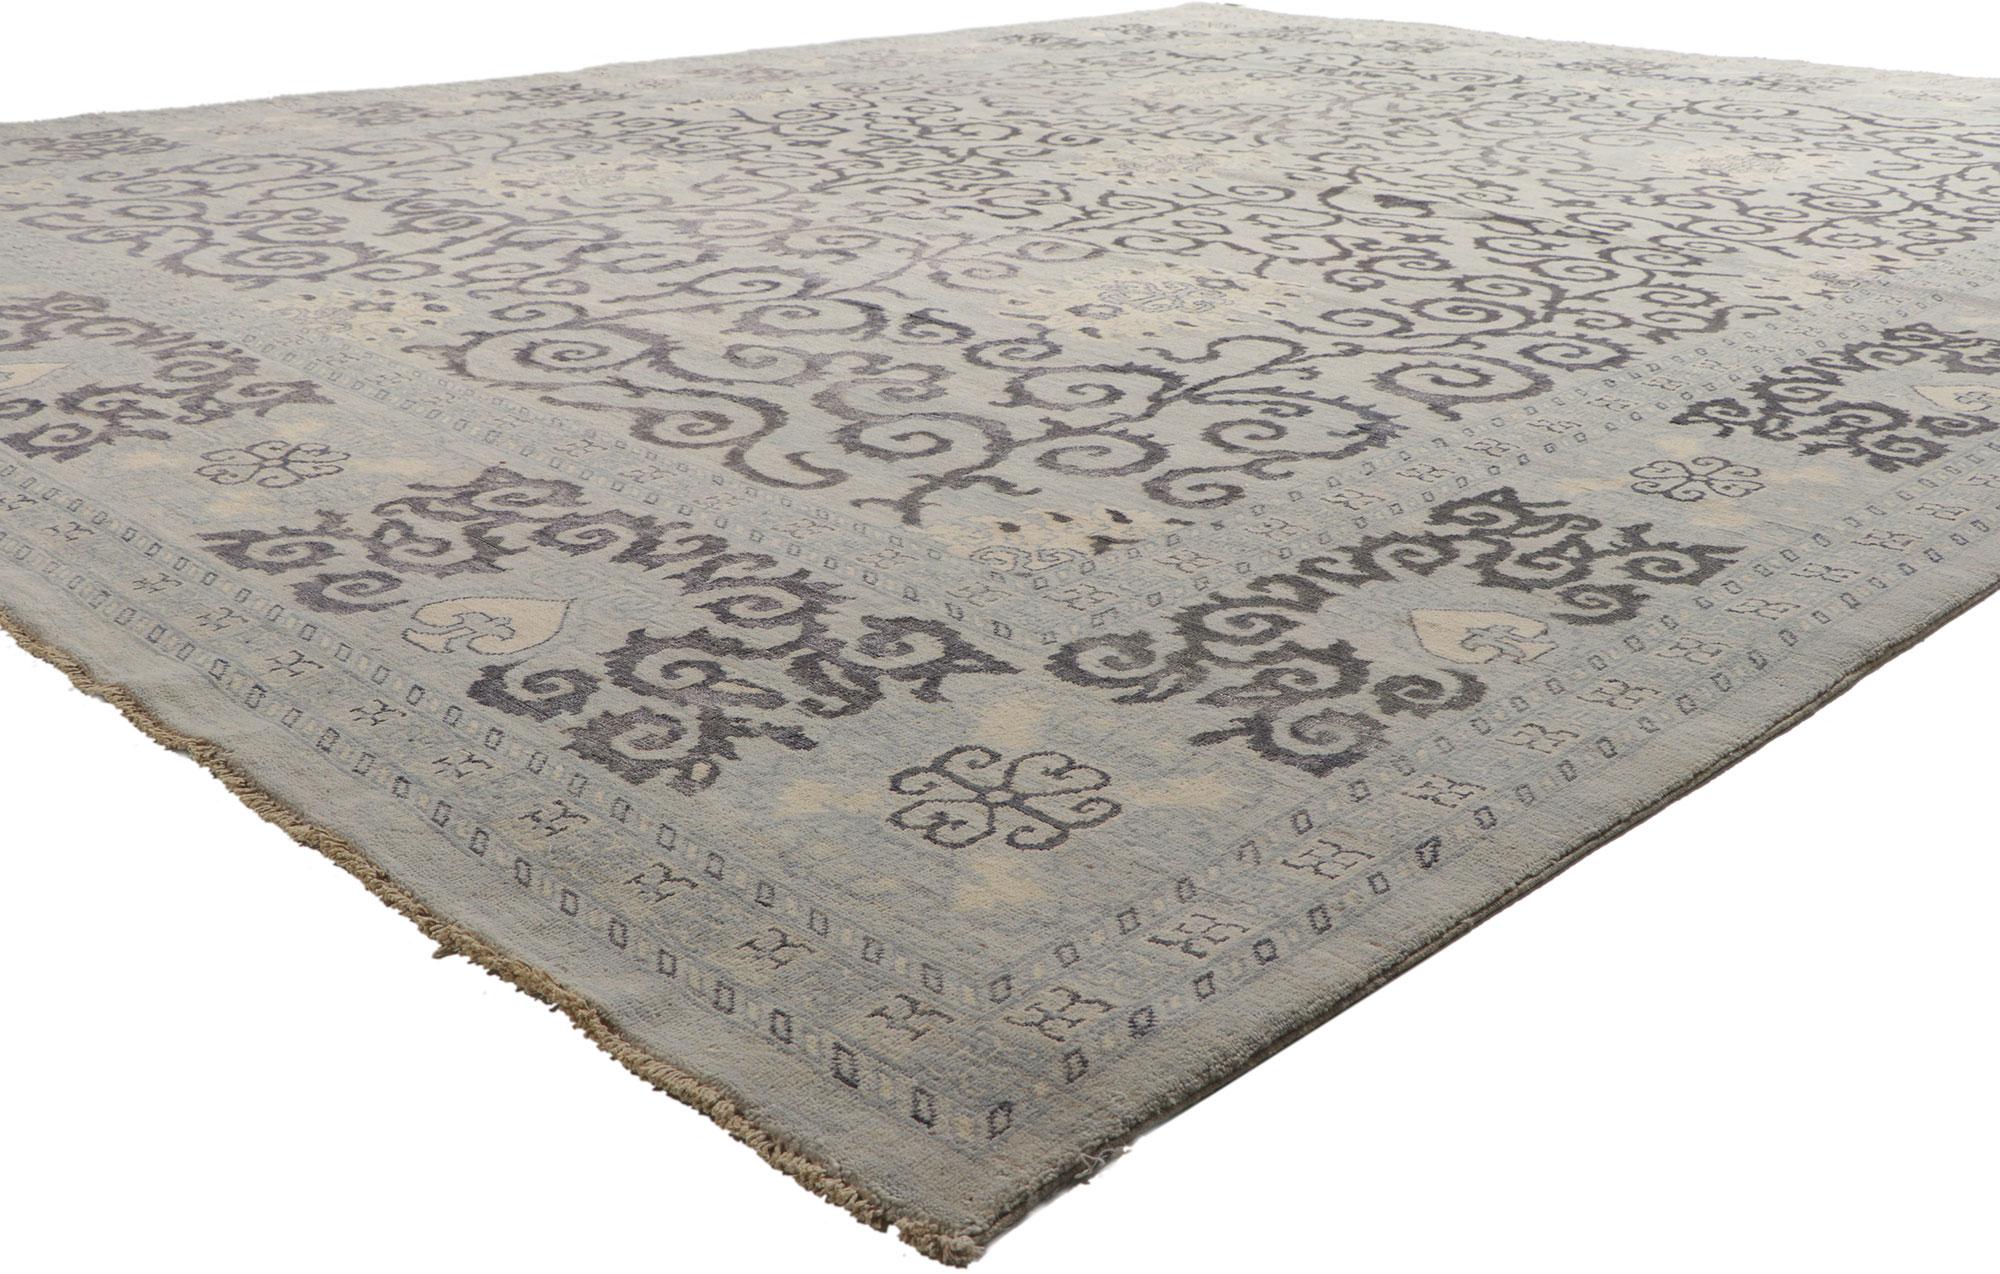 80936 New Transitional Area Rug, 11'07 x 14'05. Serene and sophisticated, this hand-knotted wool transitional area rug beautifully embodies a modern style. The composition features an all-over botanical pattern composed of amorphous organic motifs